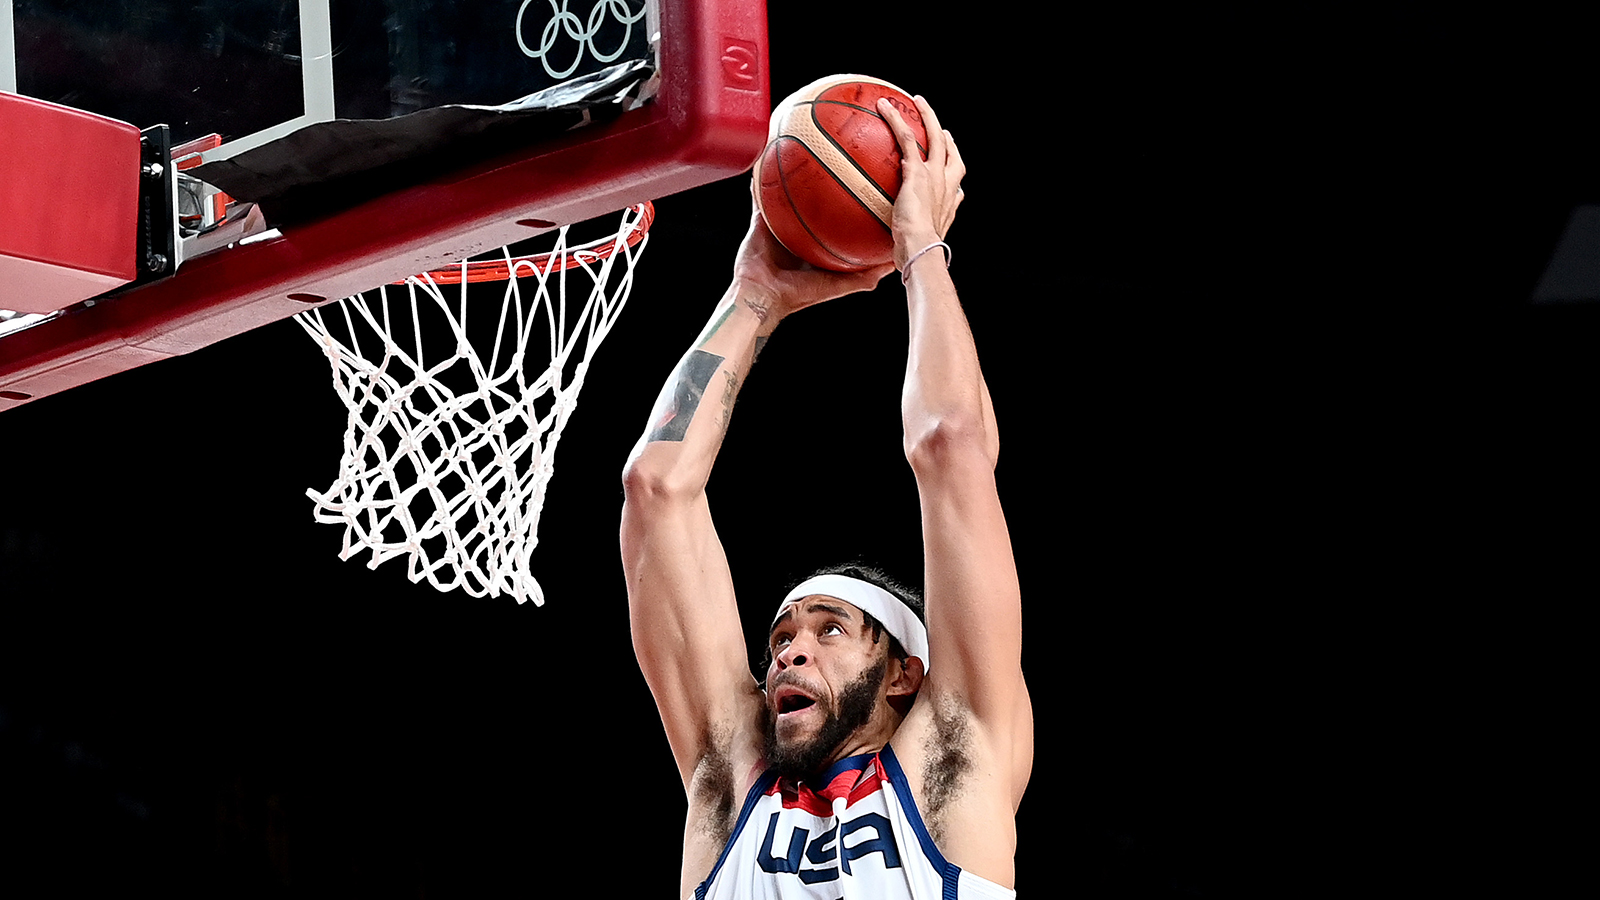 JaVale McGee dunks in Team USA's Olympic semifinal match against Australia on August 5.